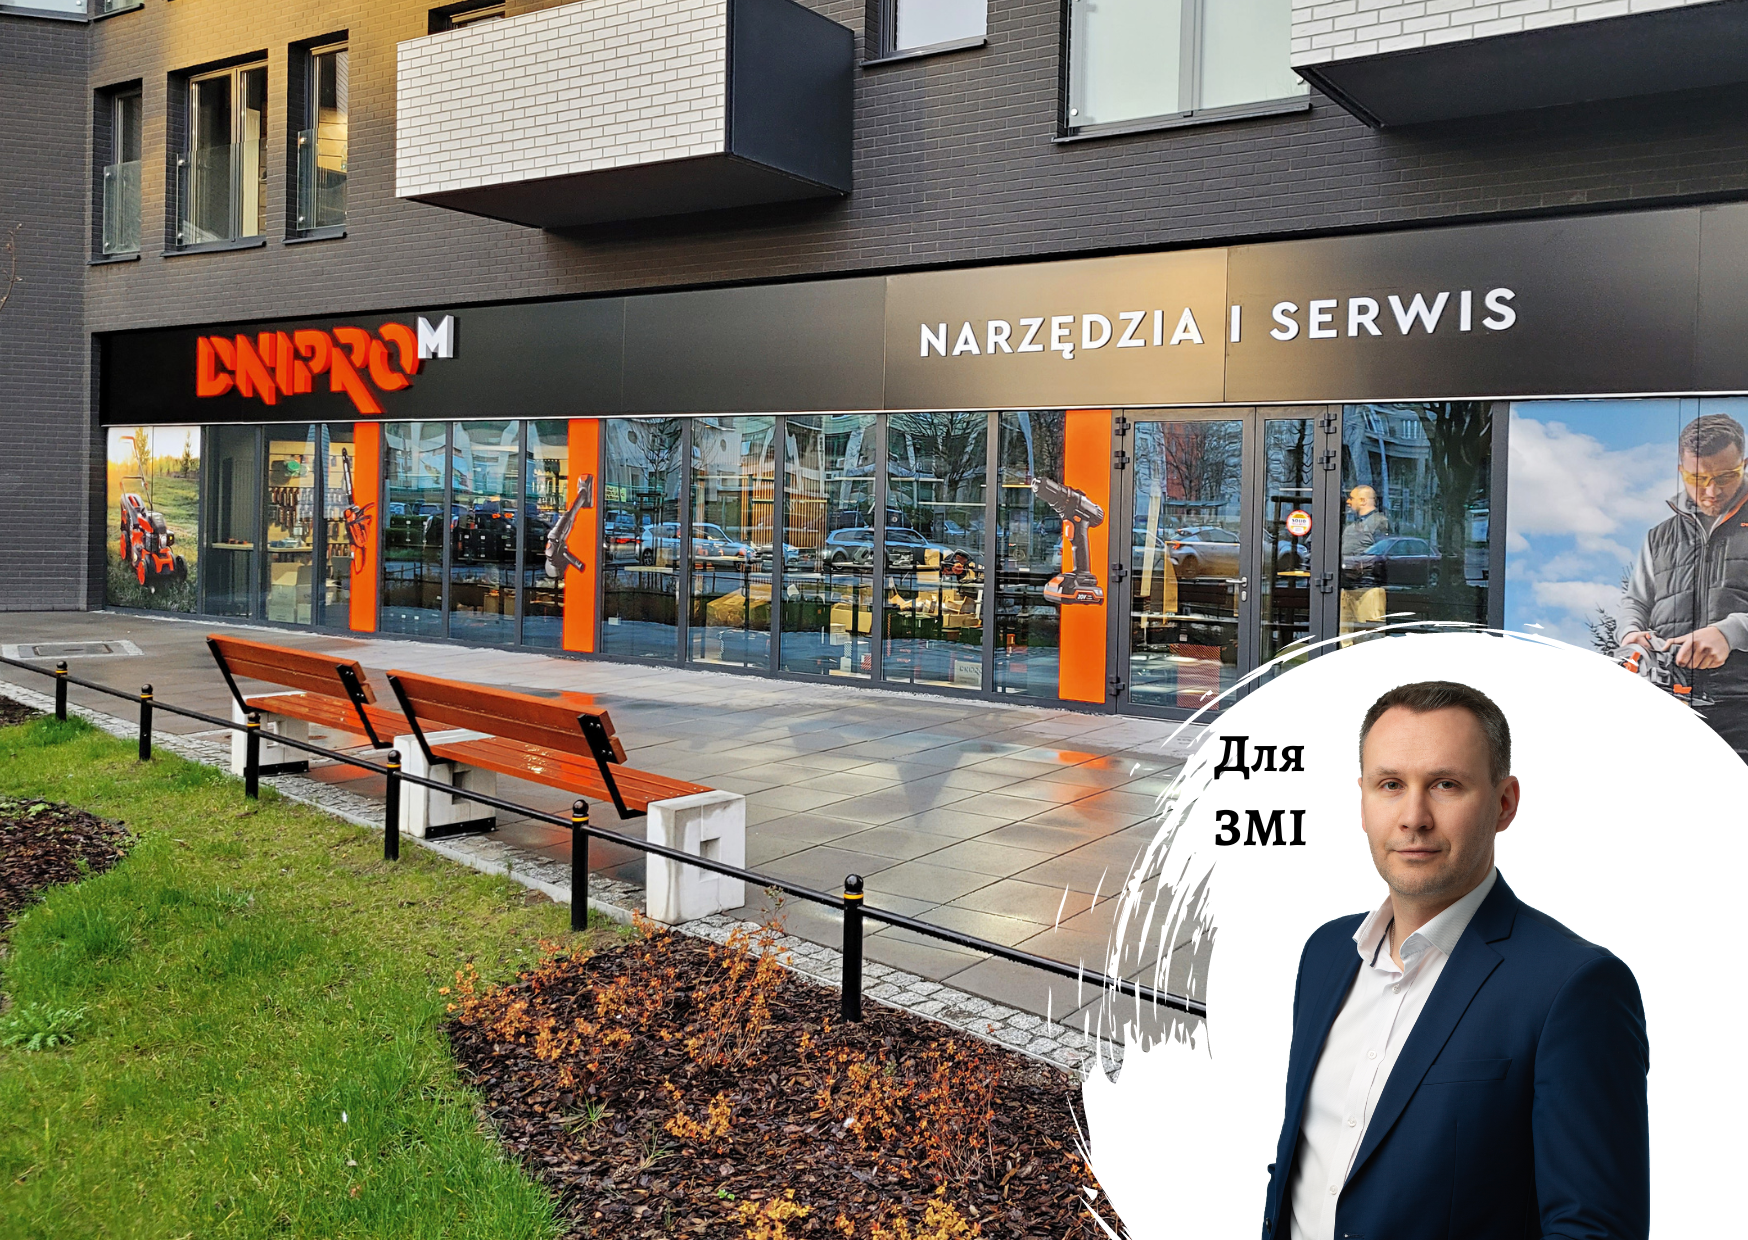 The first detailed story of the formation of the Dnipro-M chain of building tool stores - comments on the market by Pro-Consulting CEO Oleksandr Sokolov. FORBES